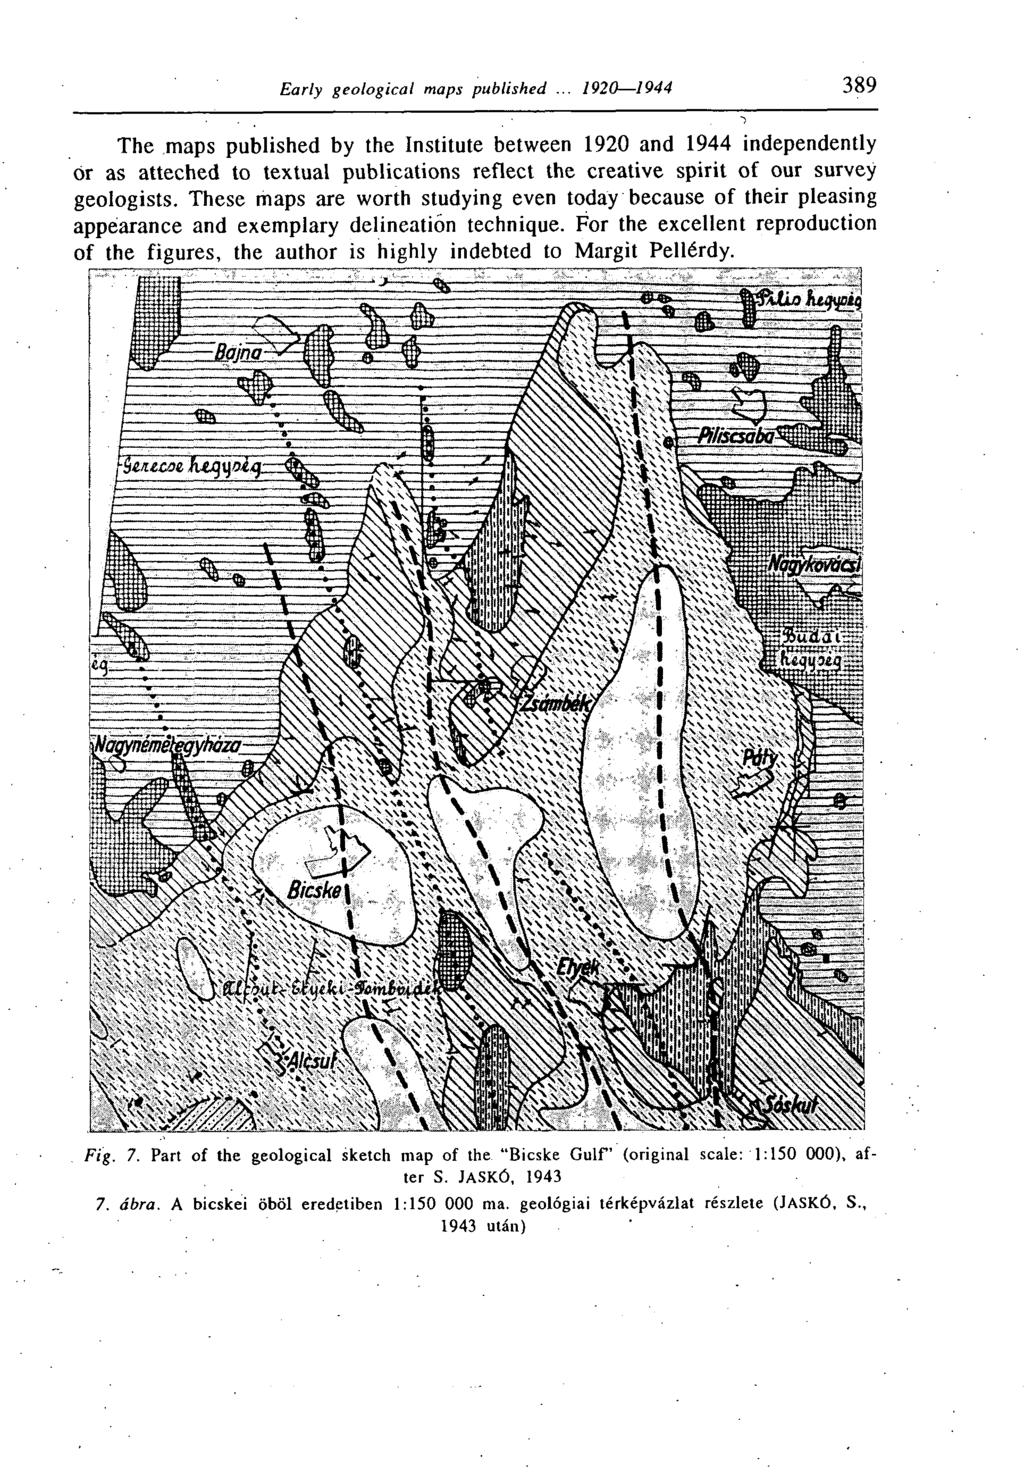 The maps published by the Institute between 1920 and 1944 independently or as atteched to textual publications reflect the creative spirit of our survey geologists.